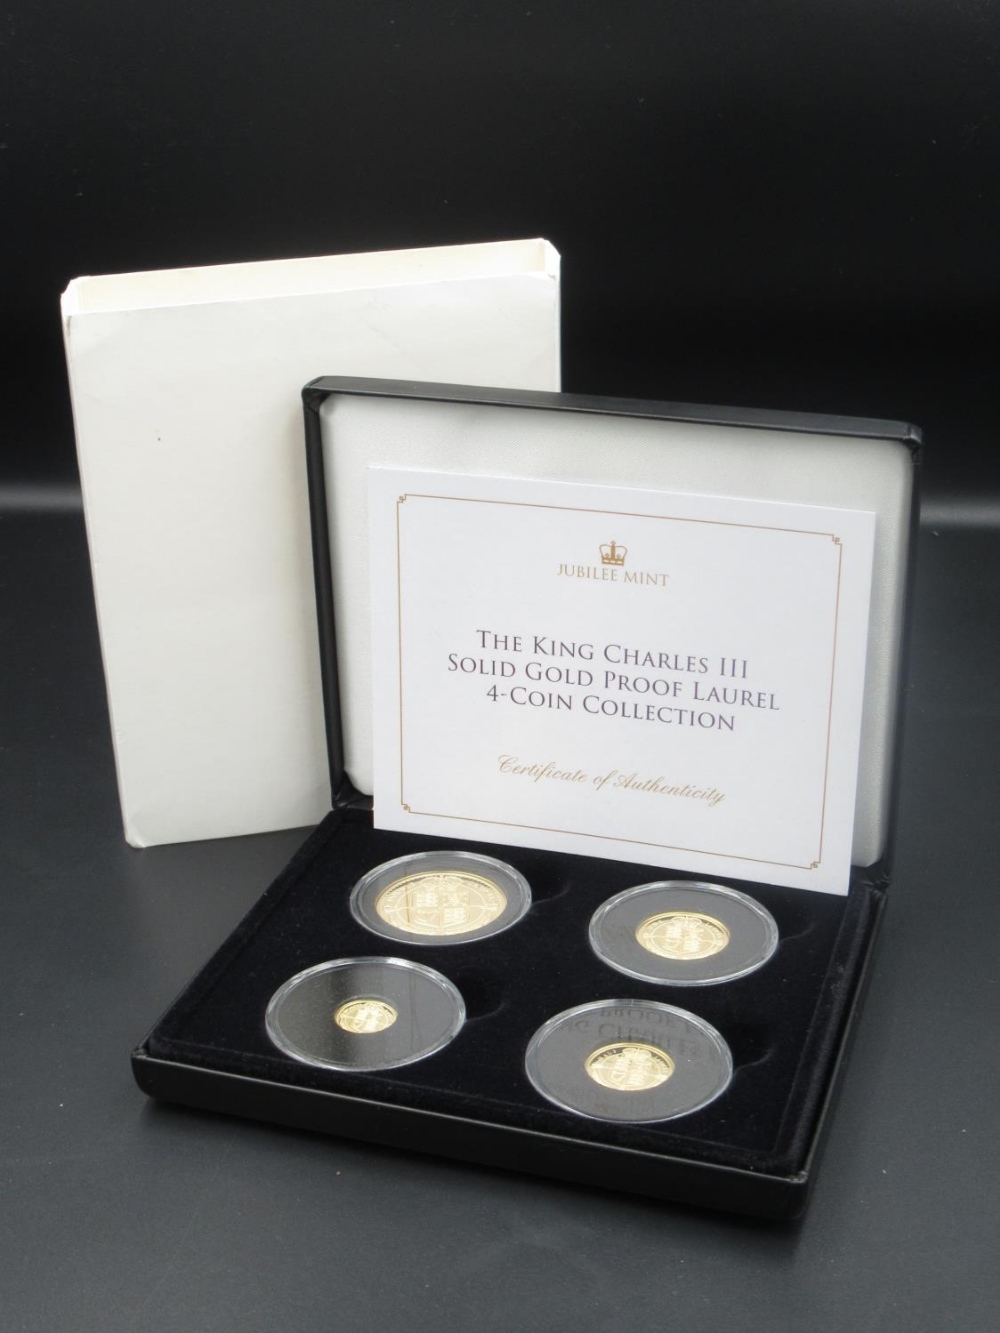 Jubilee Mint 'The King Charles III Solid Gold Proof Laurel 4-Coin Collection', country of